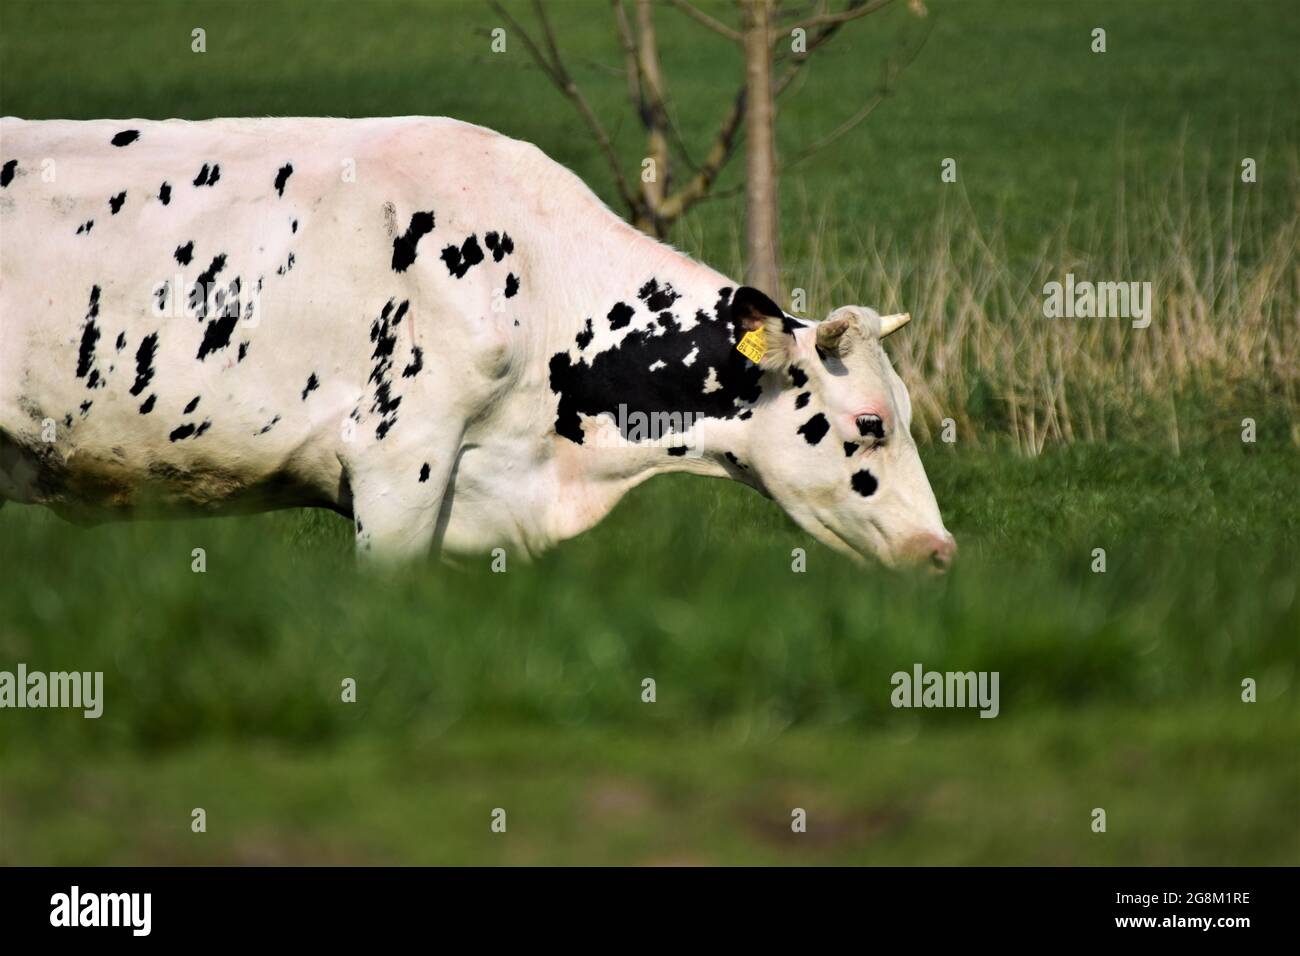 One black and white sotted cow on the meadow Stock Photo